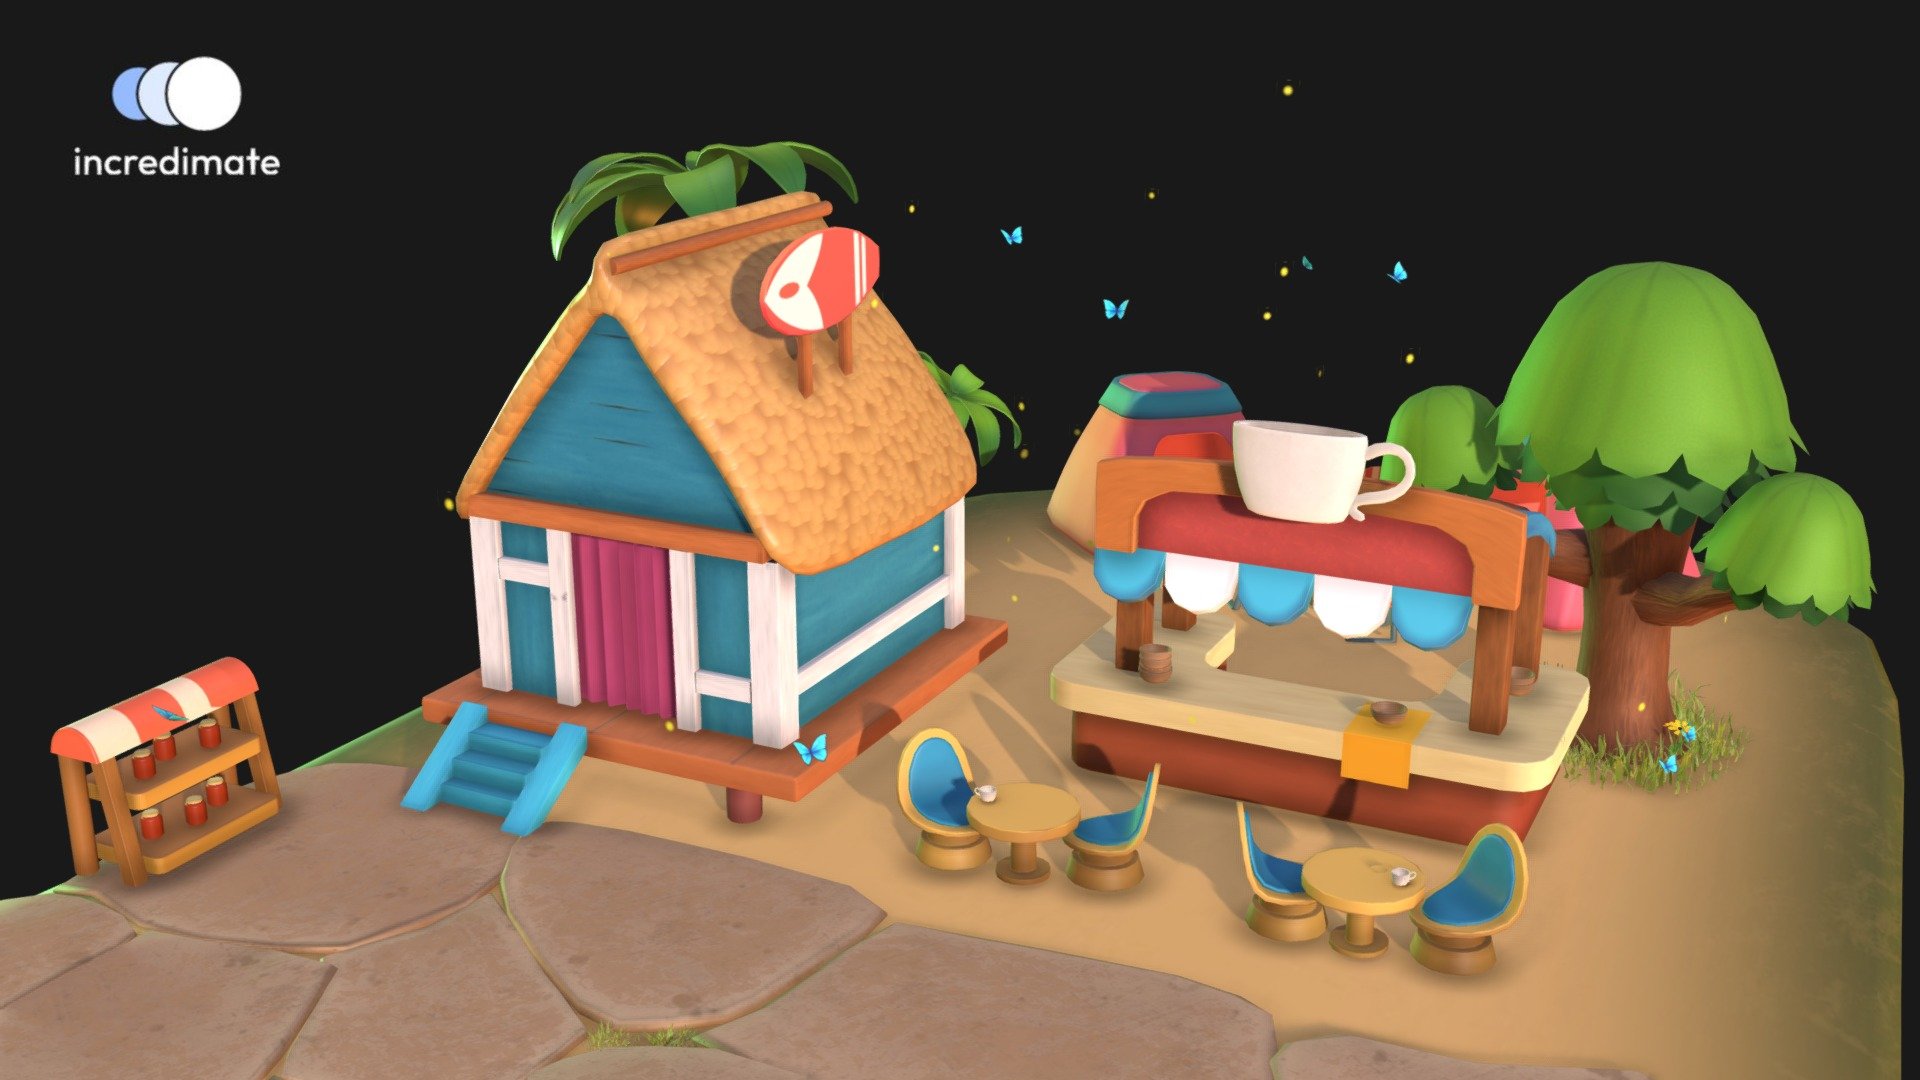 A tropical and magican haven  - this 3D model showcases a setup perfect for a beachside cafe and camp. There is a cafe bar with beautiful seating and tables in front. Next to it stands a wooden house painted in blue and white with a contrasting pink door and straw roof. A big surfboard adorns the the roof and simple blue stairs lead up to the door of this house.
Behind this setup is a beautiful campsite with two camps, a bonfire pit and 3 folding chairs. The trees, butterflies and glowing fireflies add into the tropical and magical vibe of this model! - Beachside Cafe & Camp - 3D model by Incredimate Studio (@incredimate_studio) 3d model